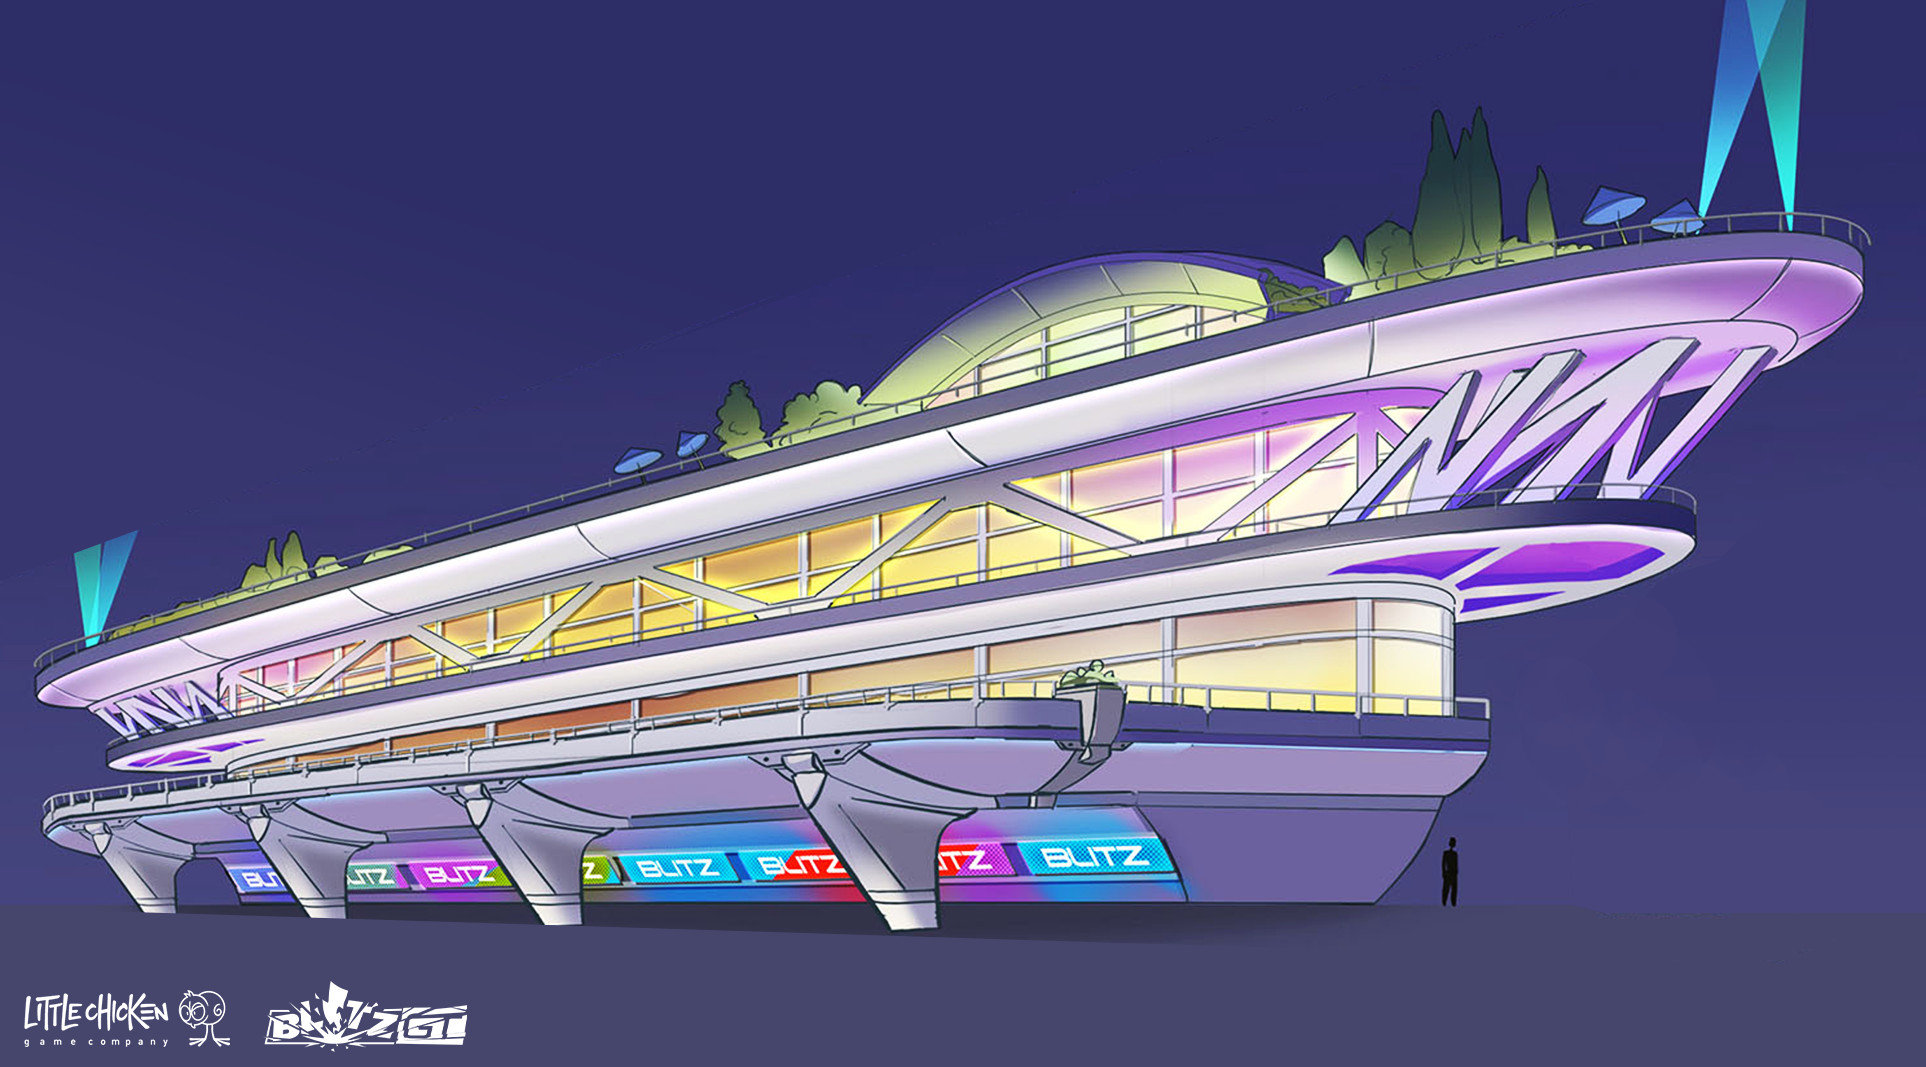 Design for the grandstand, so there would be a place for the audience.